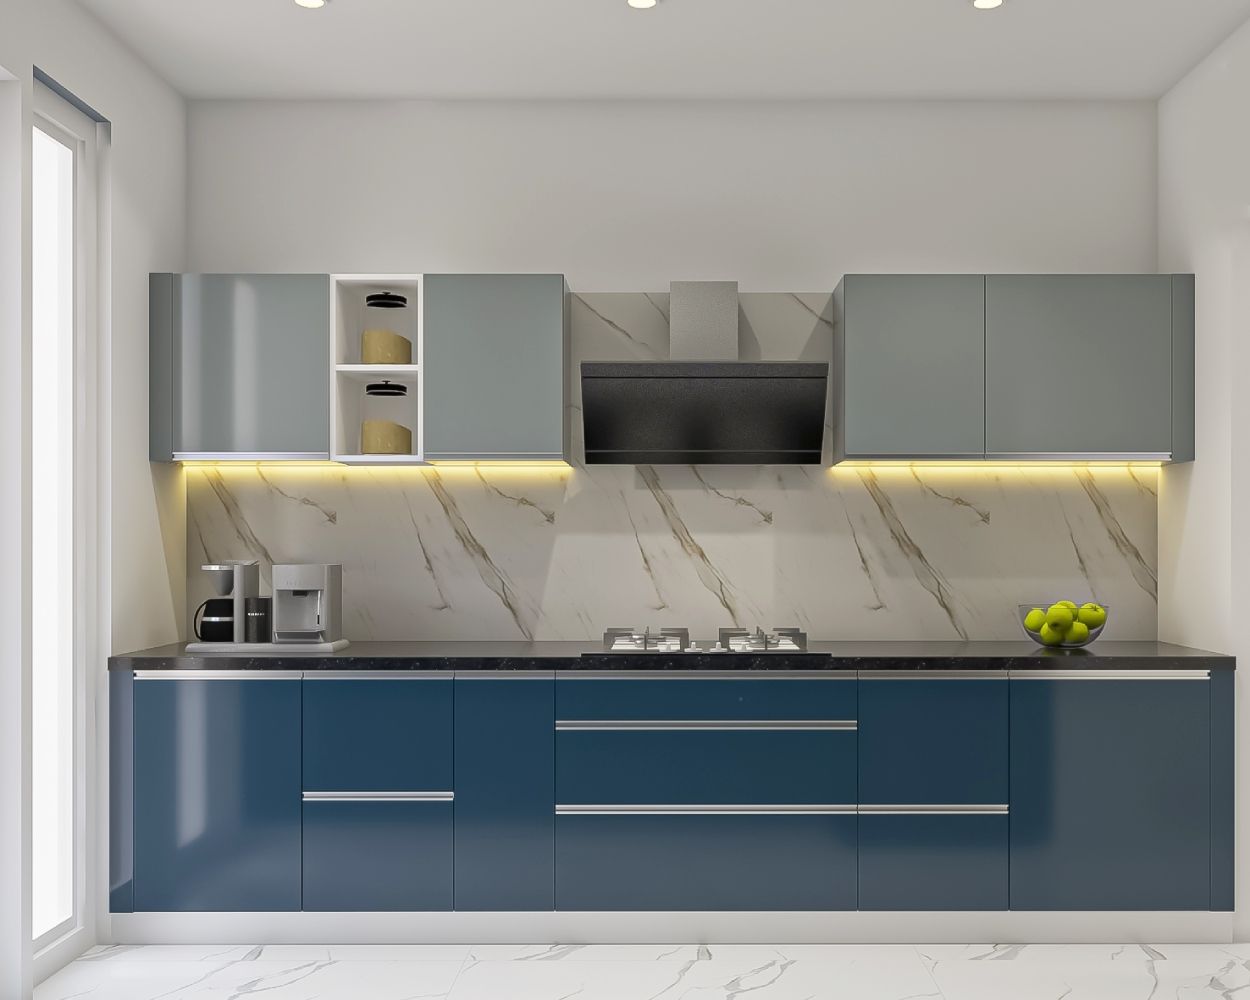 Modern Modular Parallel Kitchen Design With Shore Blue And Pearl-Toned Cabinets